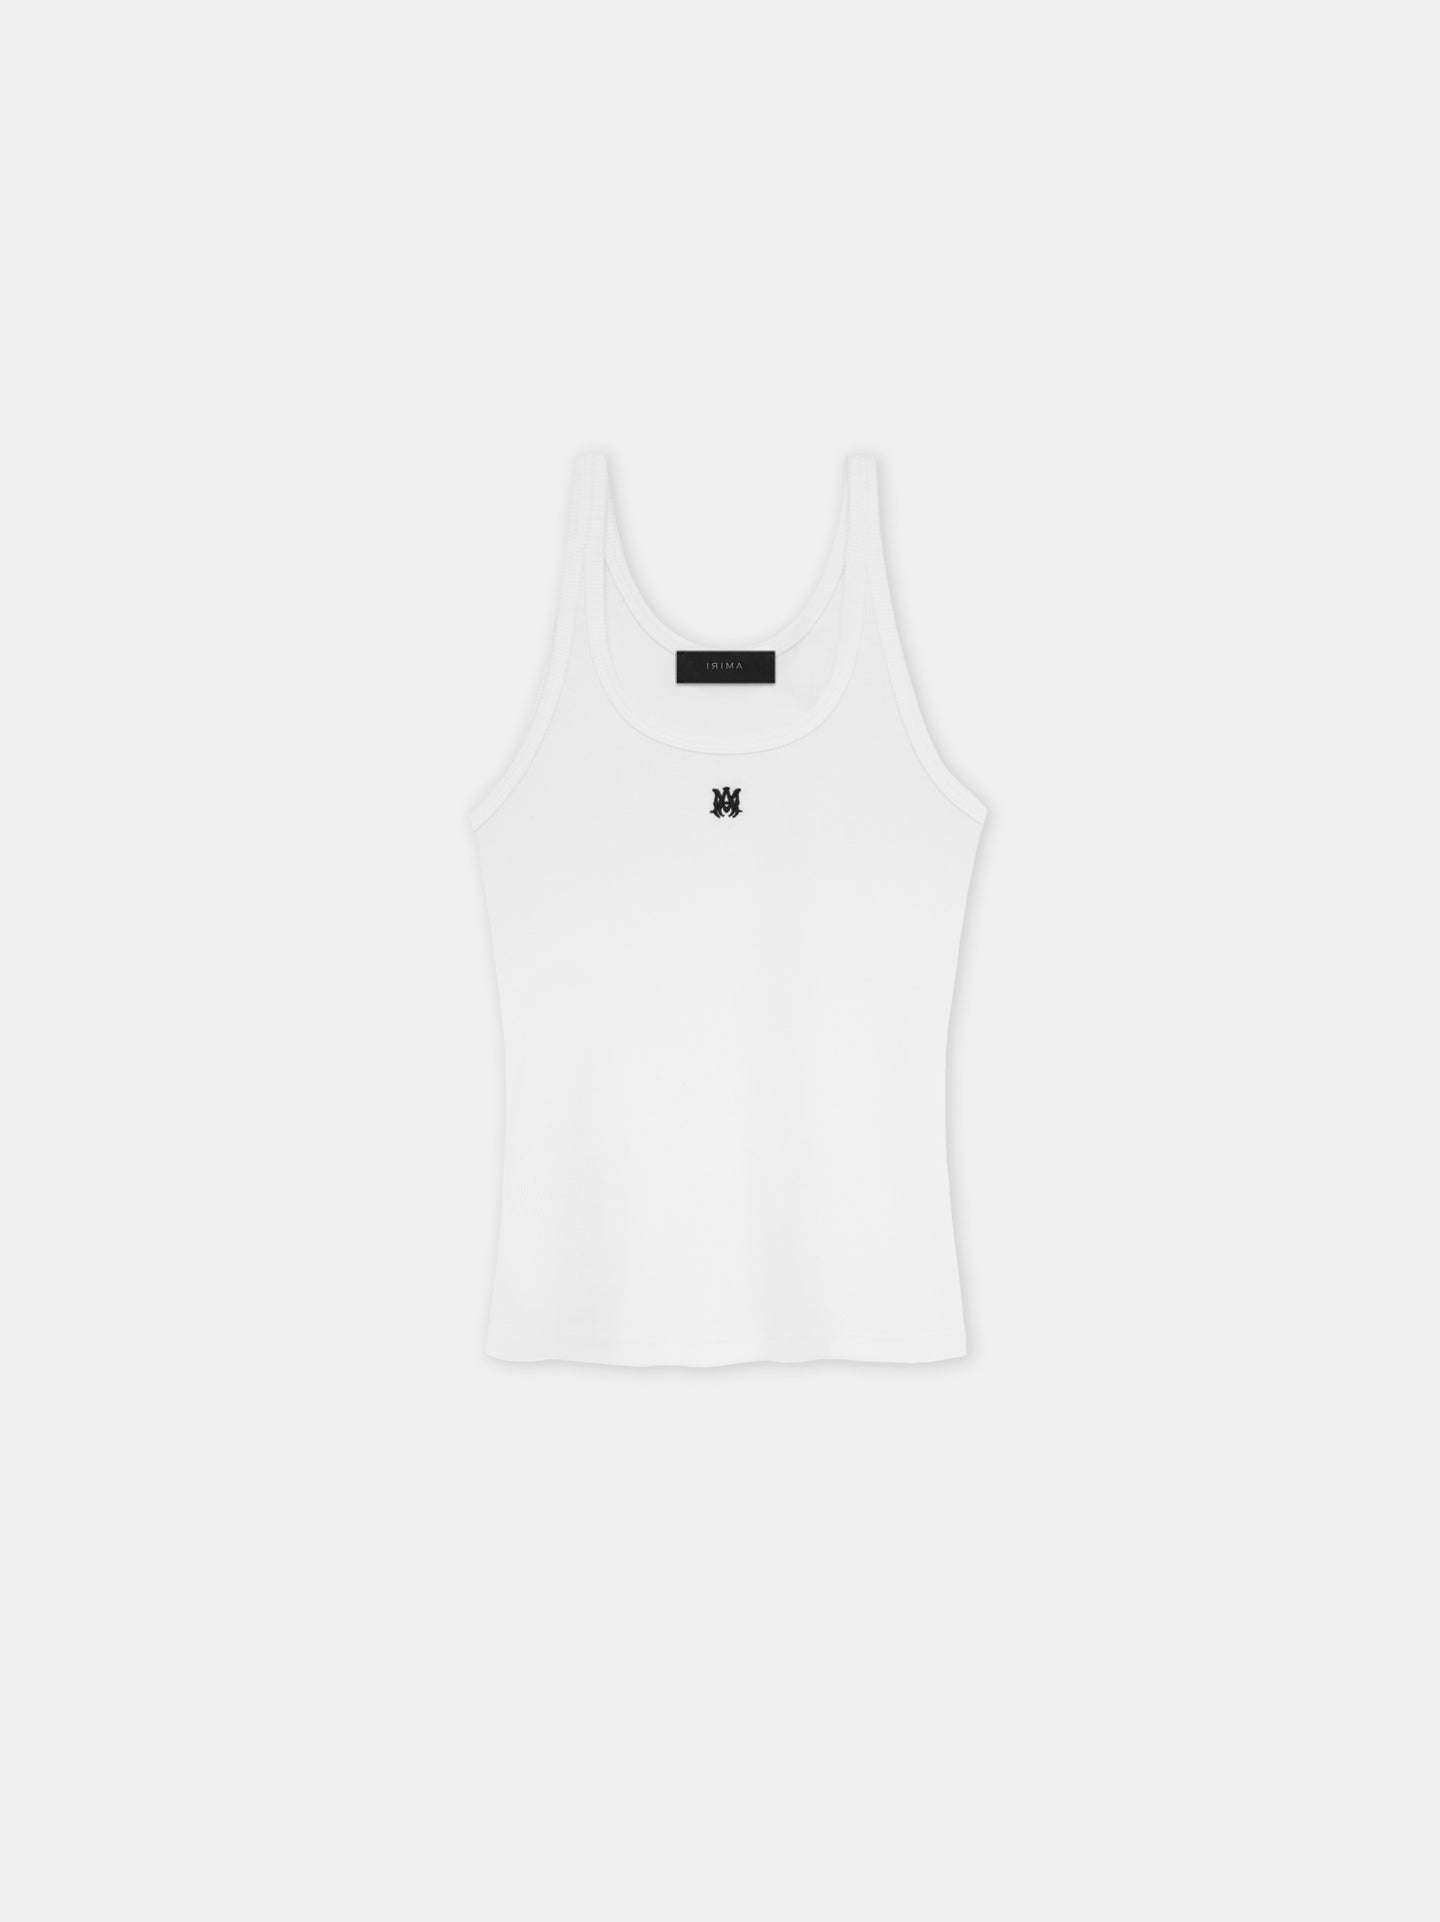 WOMEN - WOMEN'S MA EMBROIDERED RIBBED TANK - White